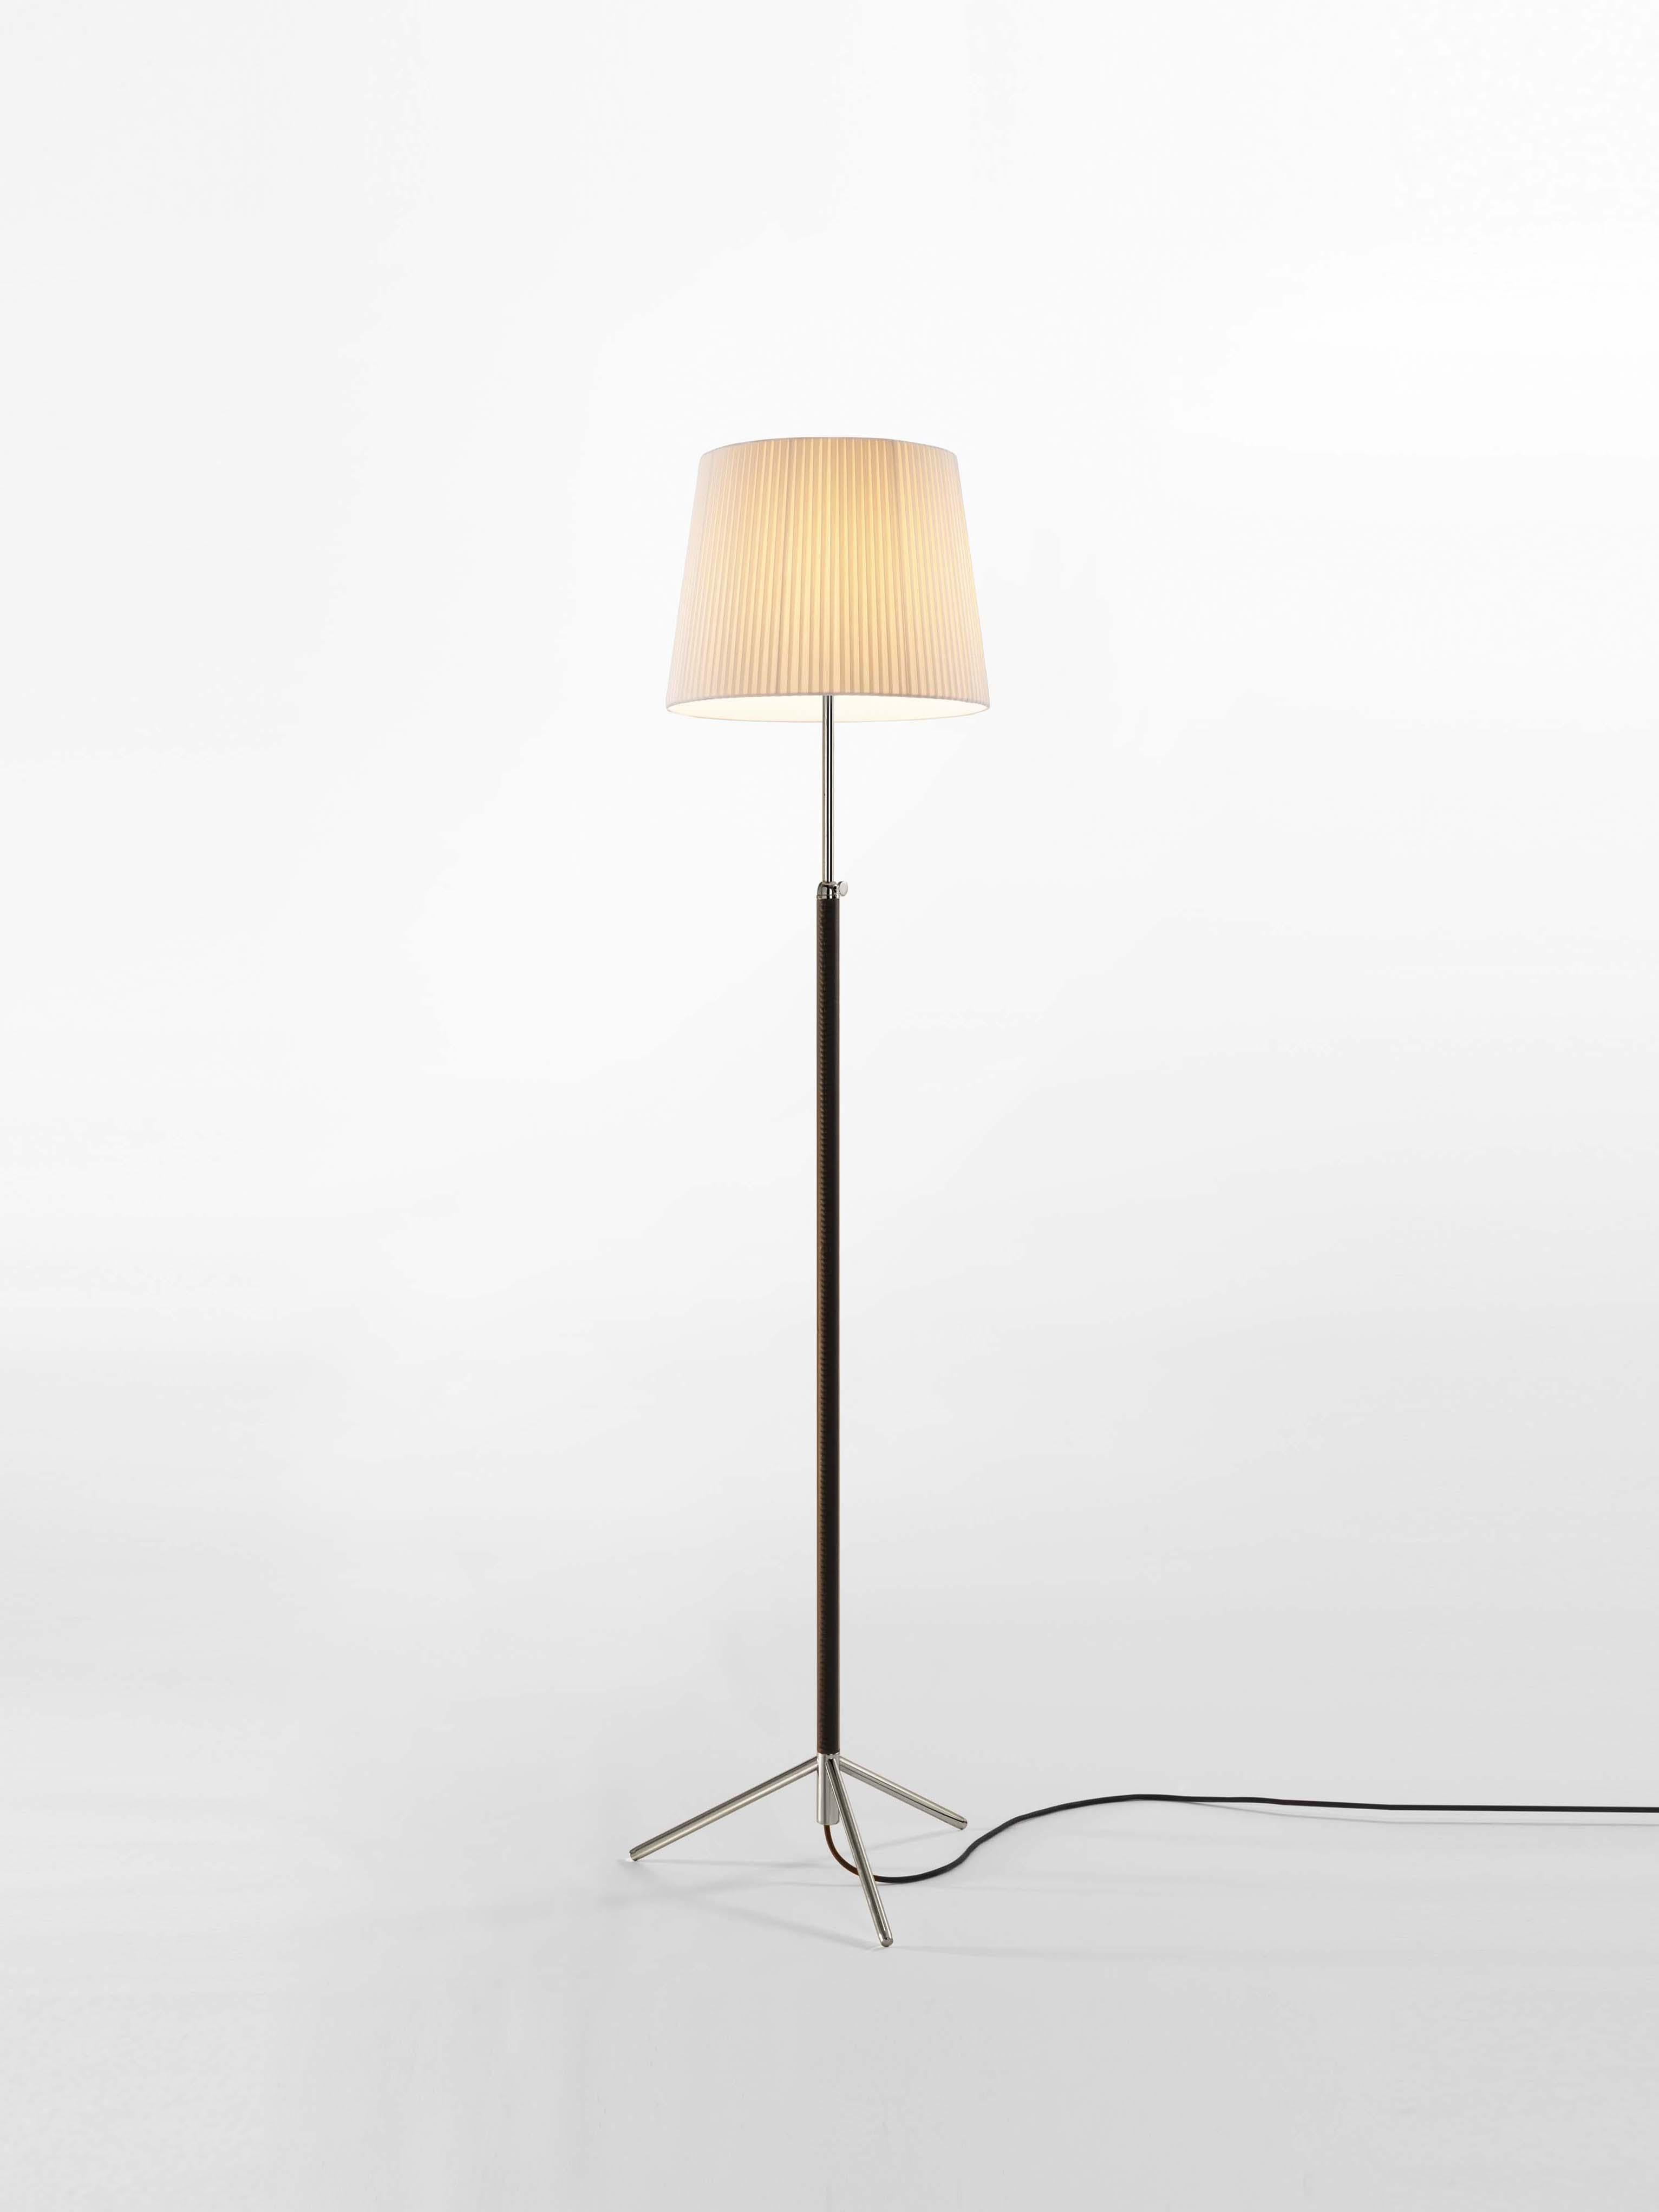 Natural and chrome pie de salón G3 floor lamp by Jaume Sans
Dimensions: D 40 x H 120-160 cm
Materials: Metal, leather, ribbon.
Available in chrome-plated or polished brass structure.
Available in other shade colors and sizes.

This slender